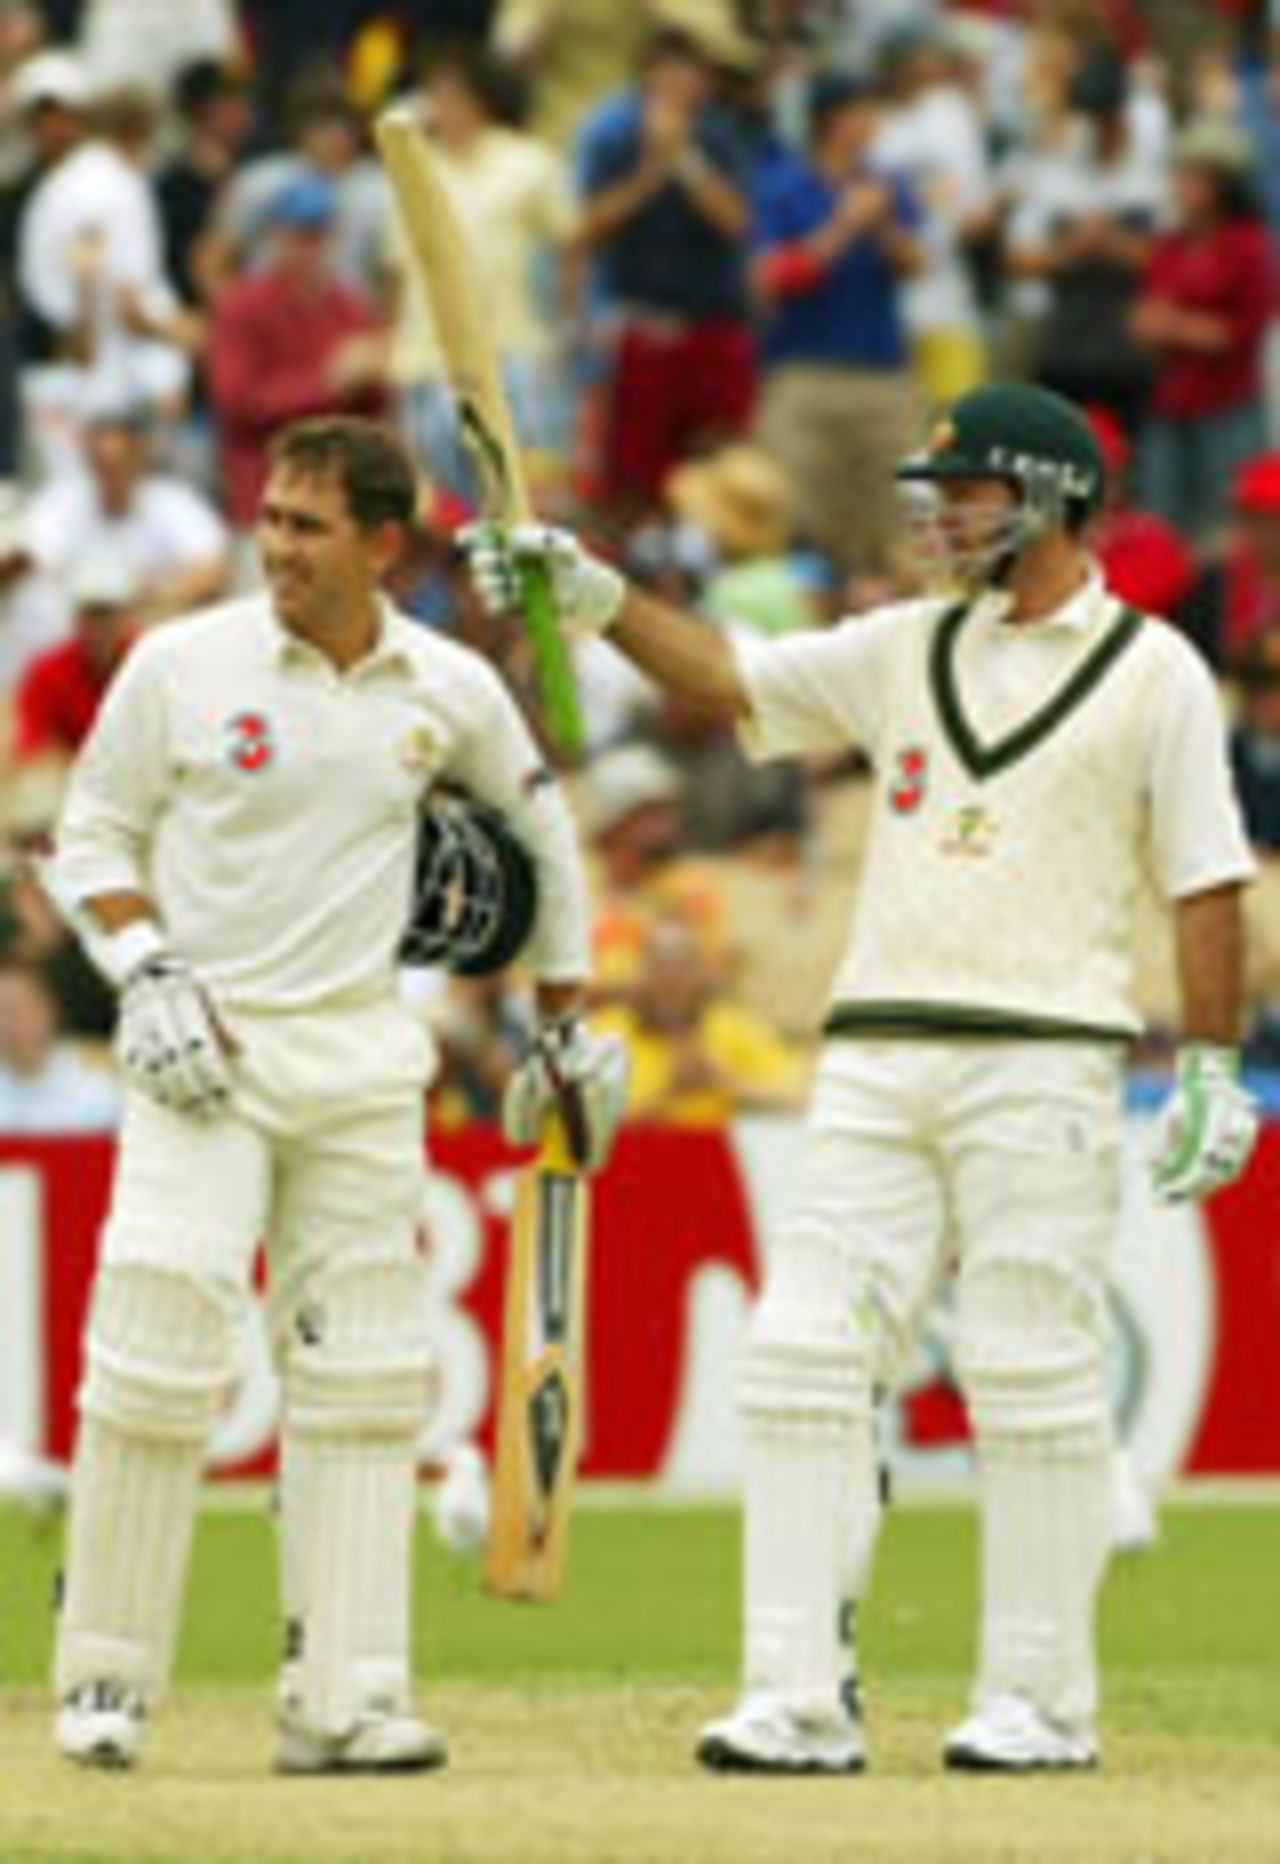 Ricky Ponting on his way to a hundred, Day 1, 2nd Test, Adelaide, 12 December, 2003